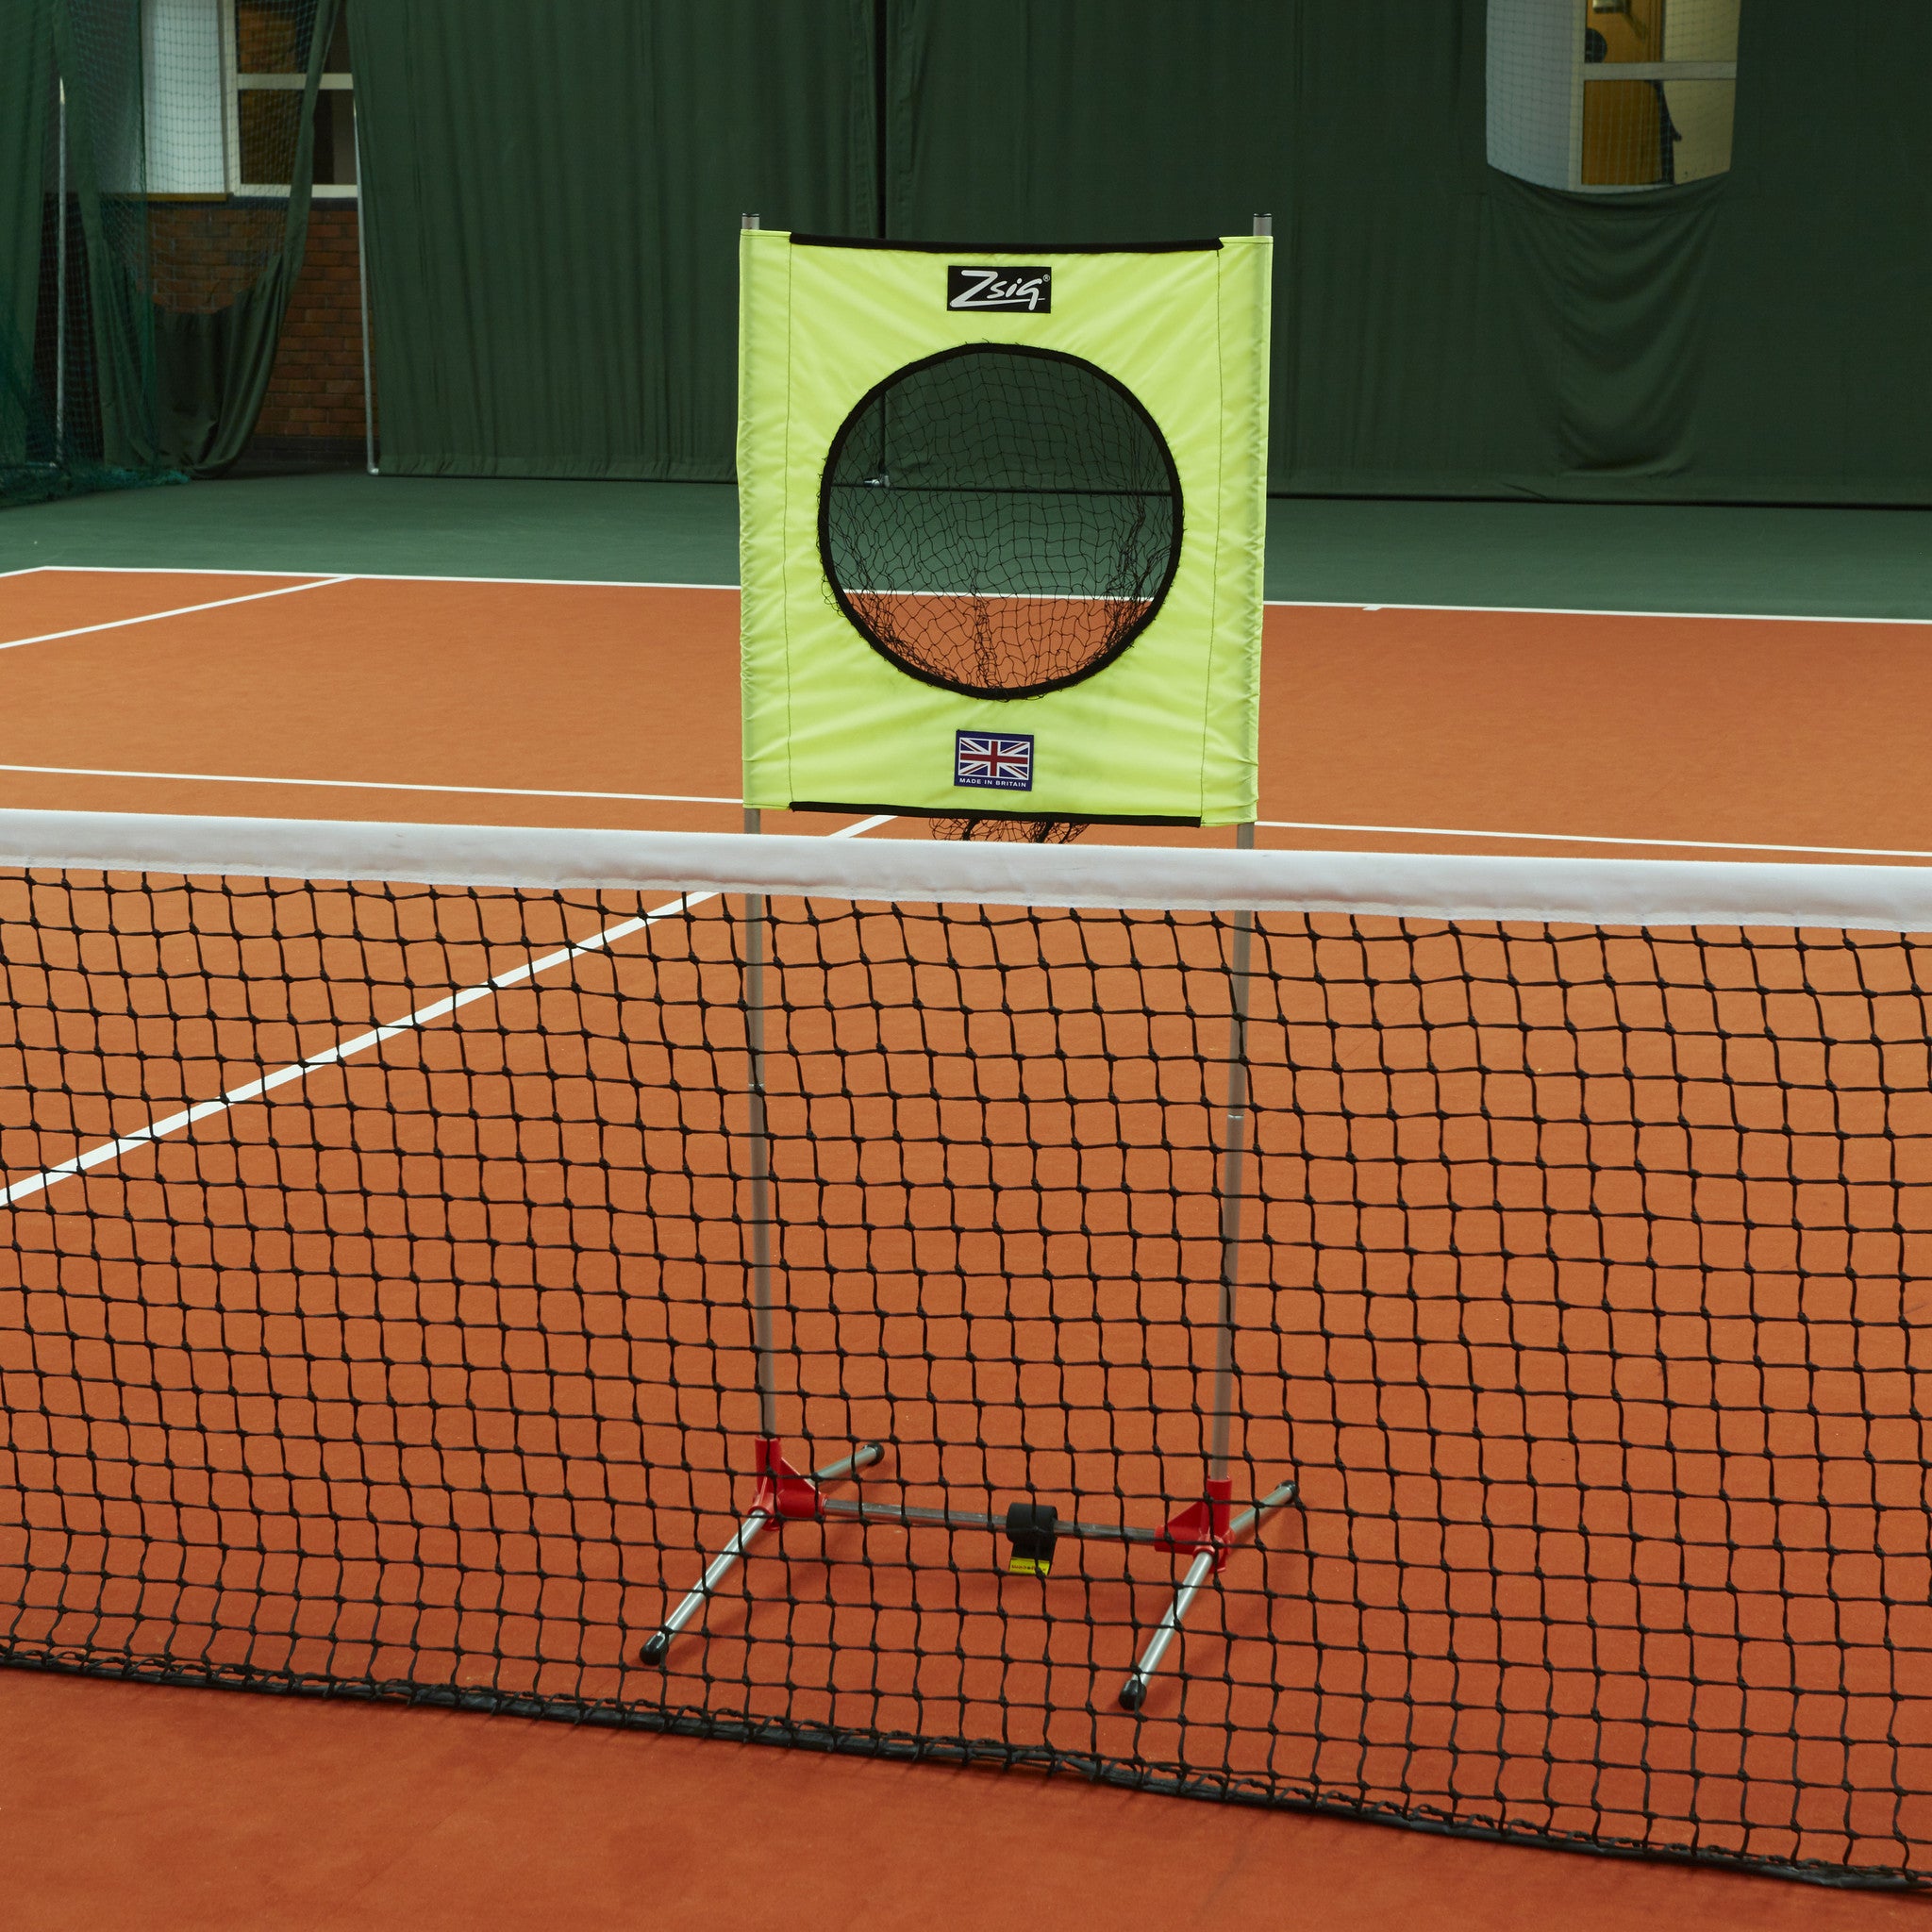 Zsig portable Target trainer in position behind a full-size tennis net.